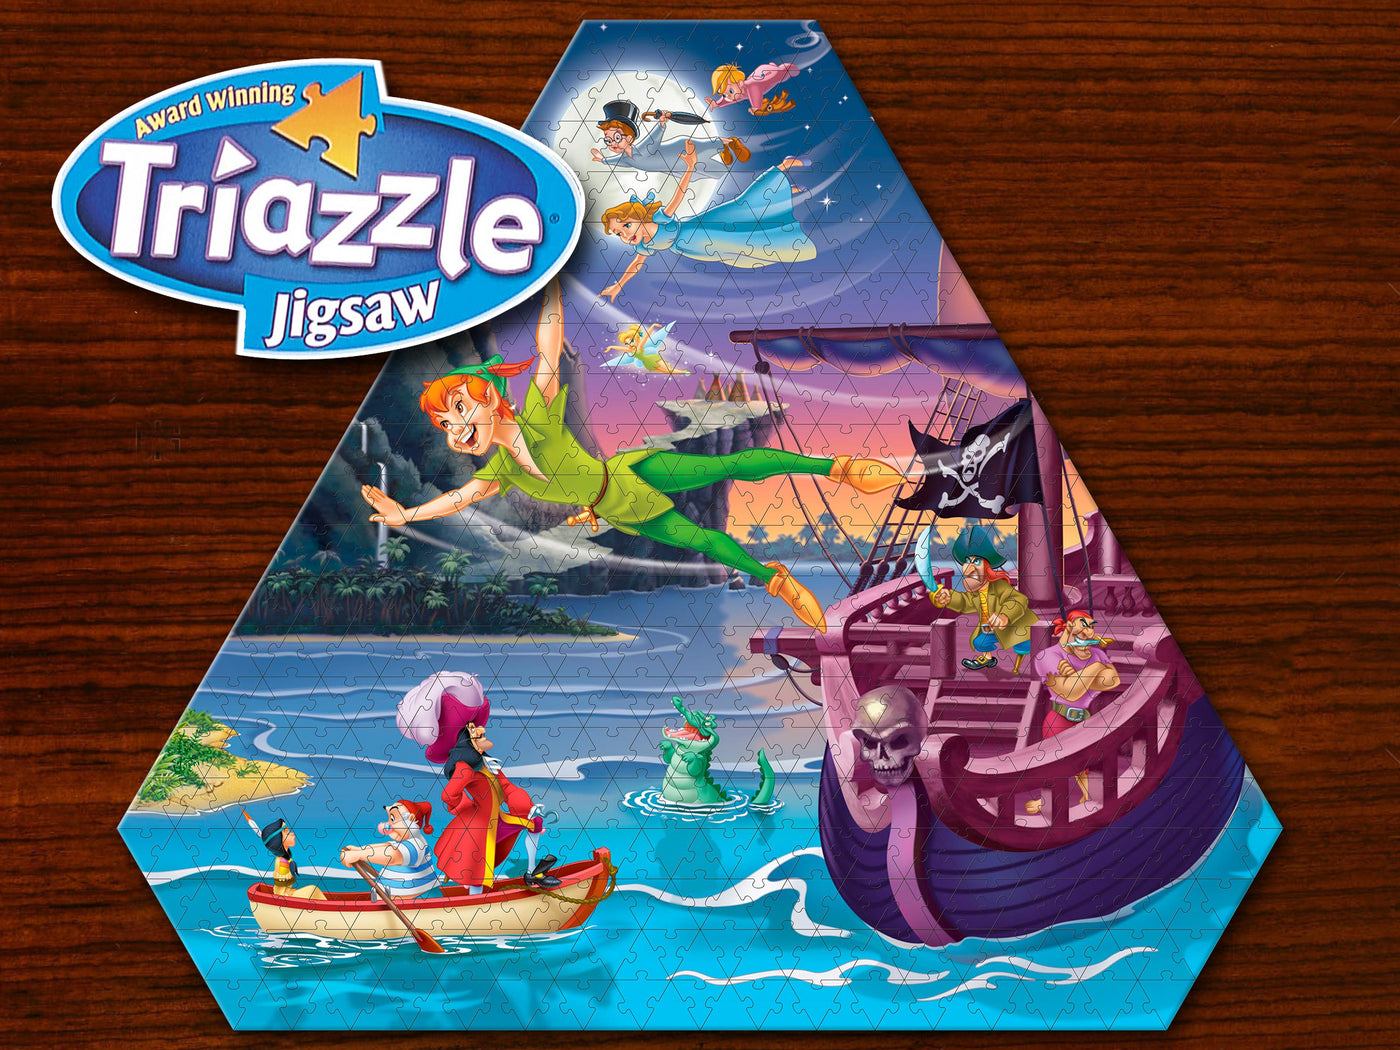 Rare Collectable Triazzle Jigsaw - Peter Pan - (NOT with Tray - Boxed Puzzle) - by Dan Gilbert